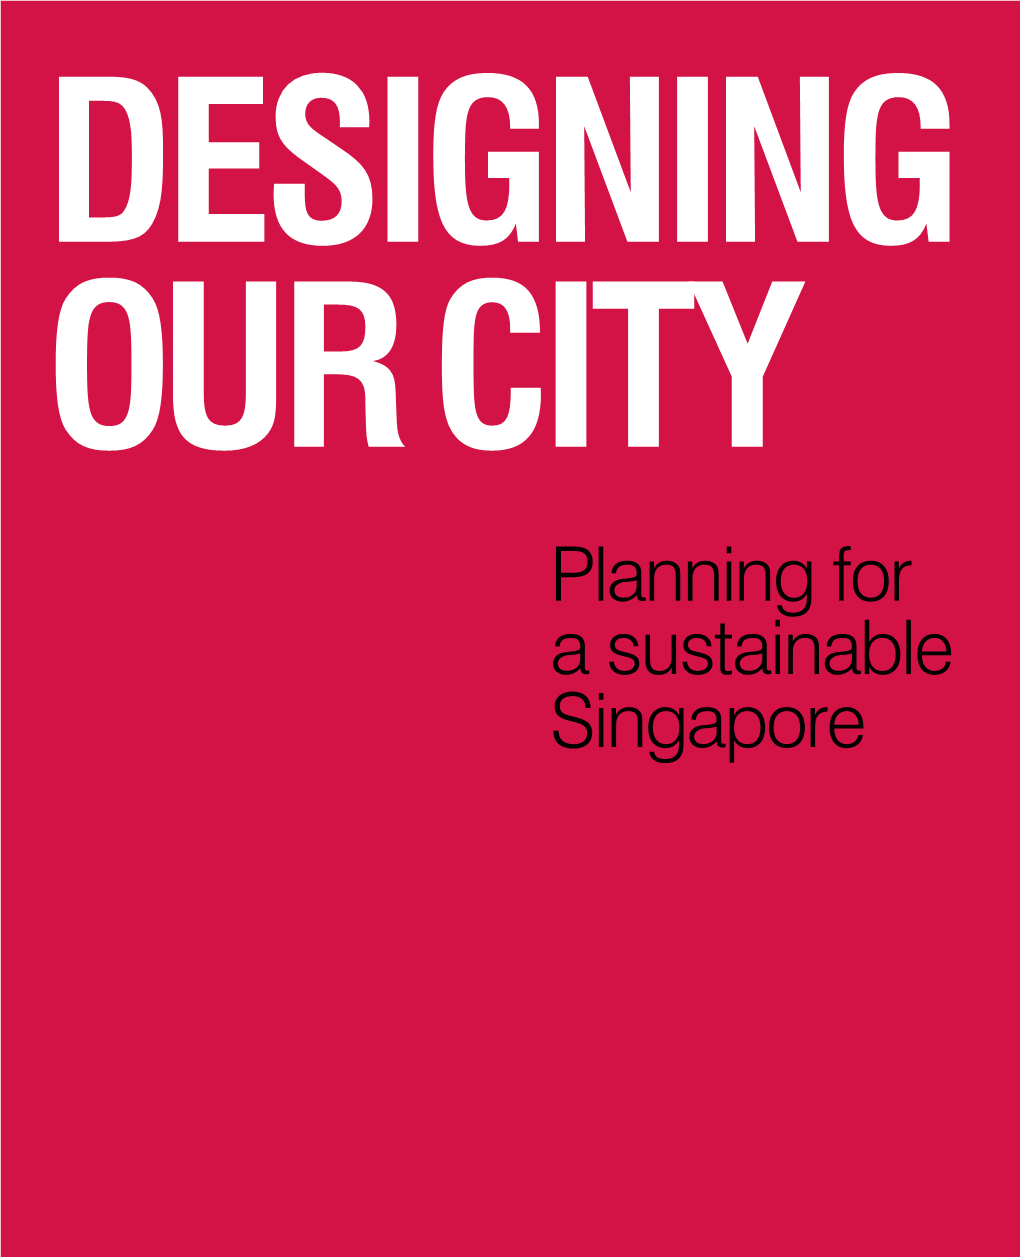 Planning for a Sustainable Singapore